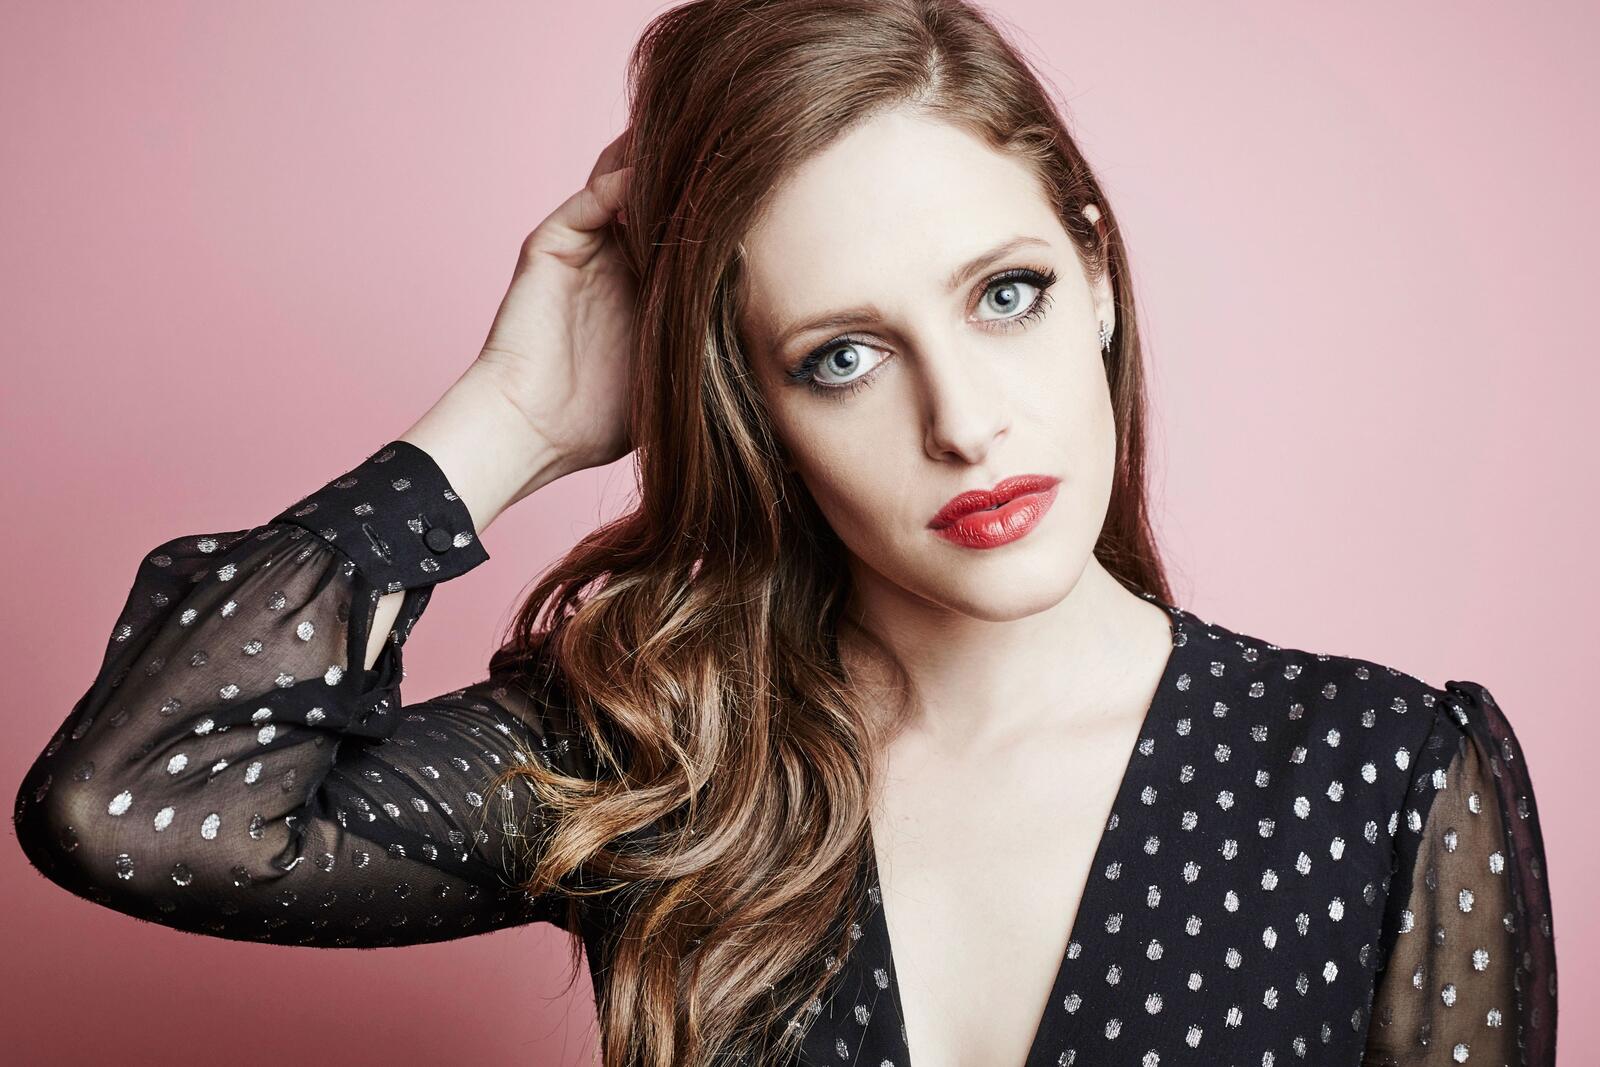 Free photo A portrait of Carly Chaikin on a pink background